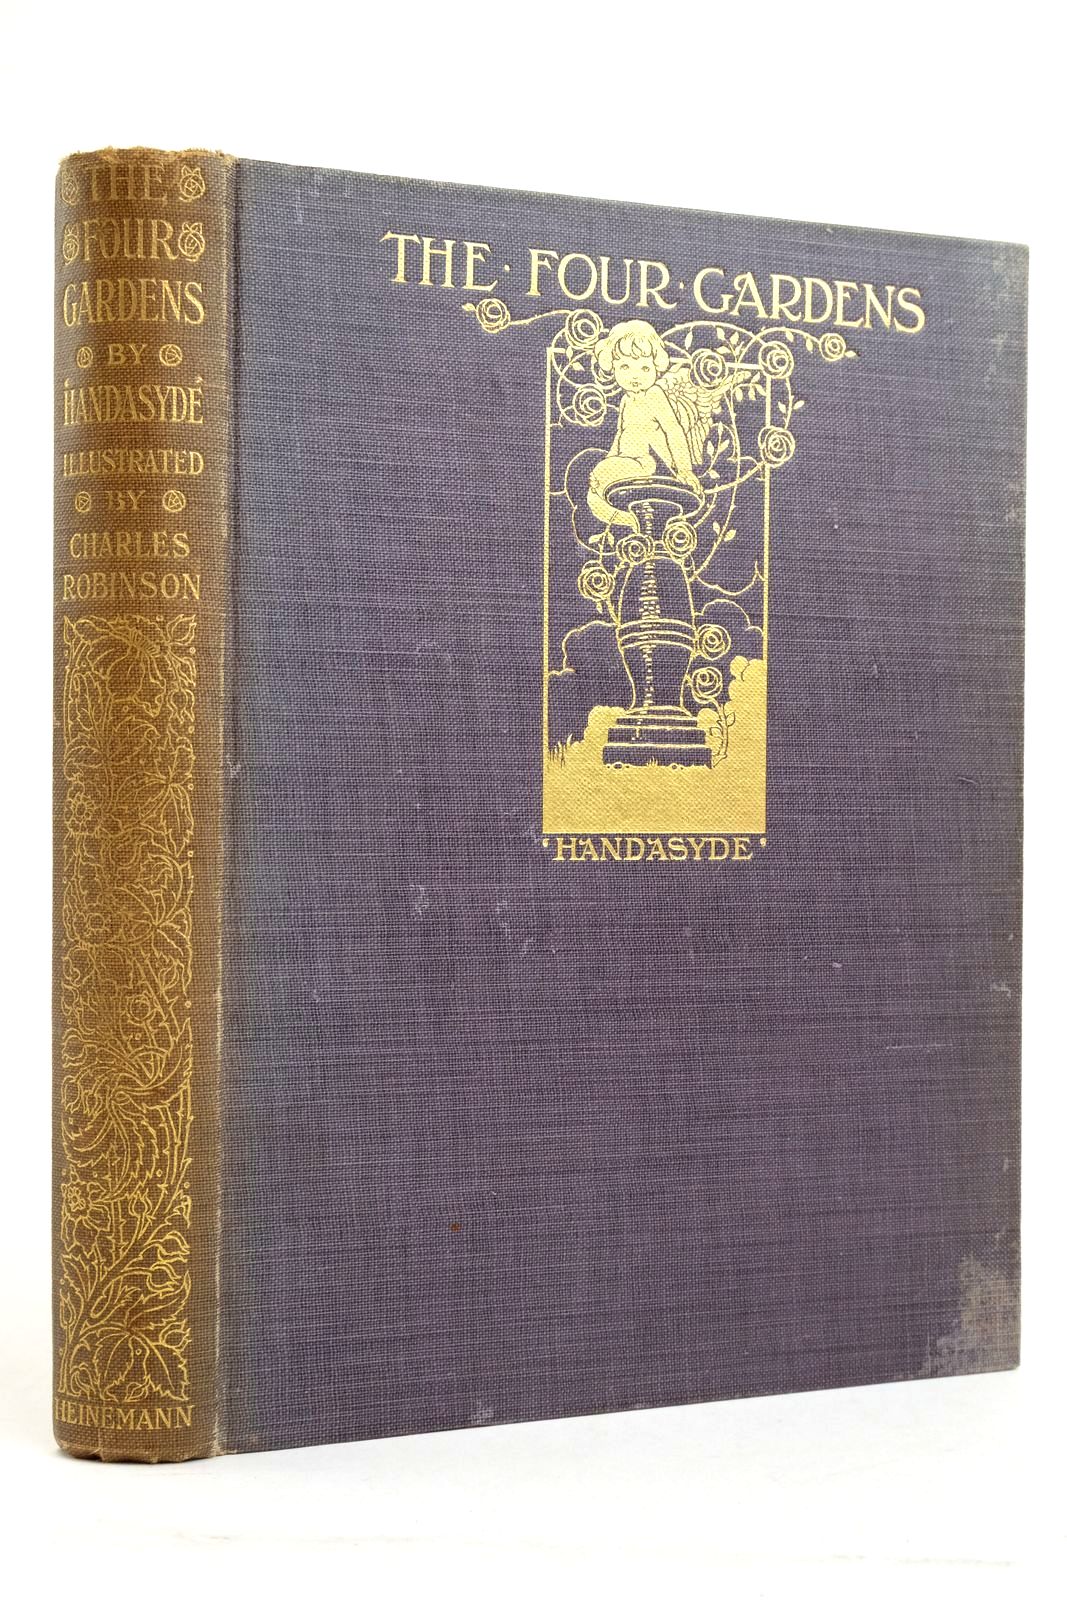 Photo of THE FOUR GARDENS written by Handasyde,  illustrated by Robinson, Charles published by William Heinemann (STOCK CODE: 2135794)  for sale by Stella & Rose's Books